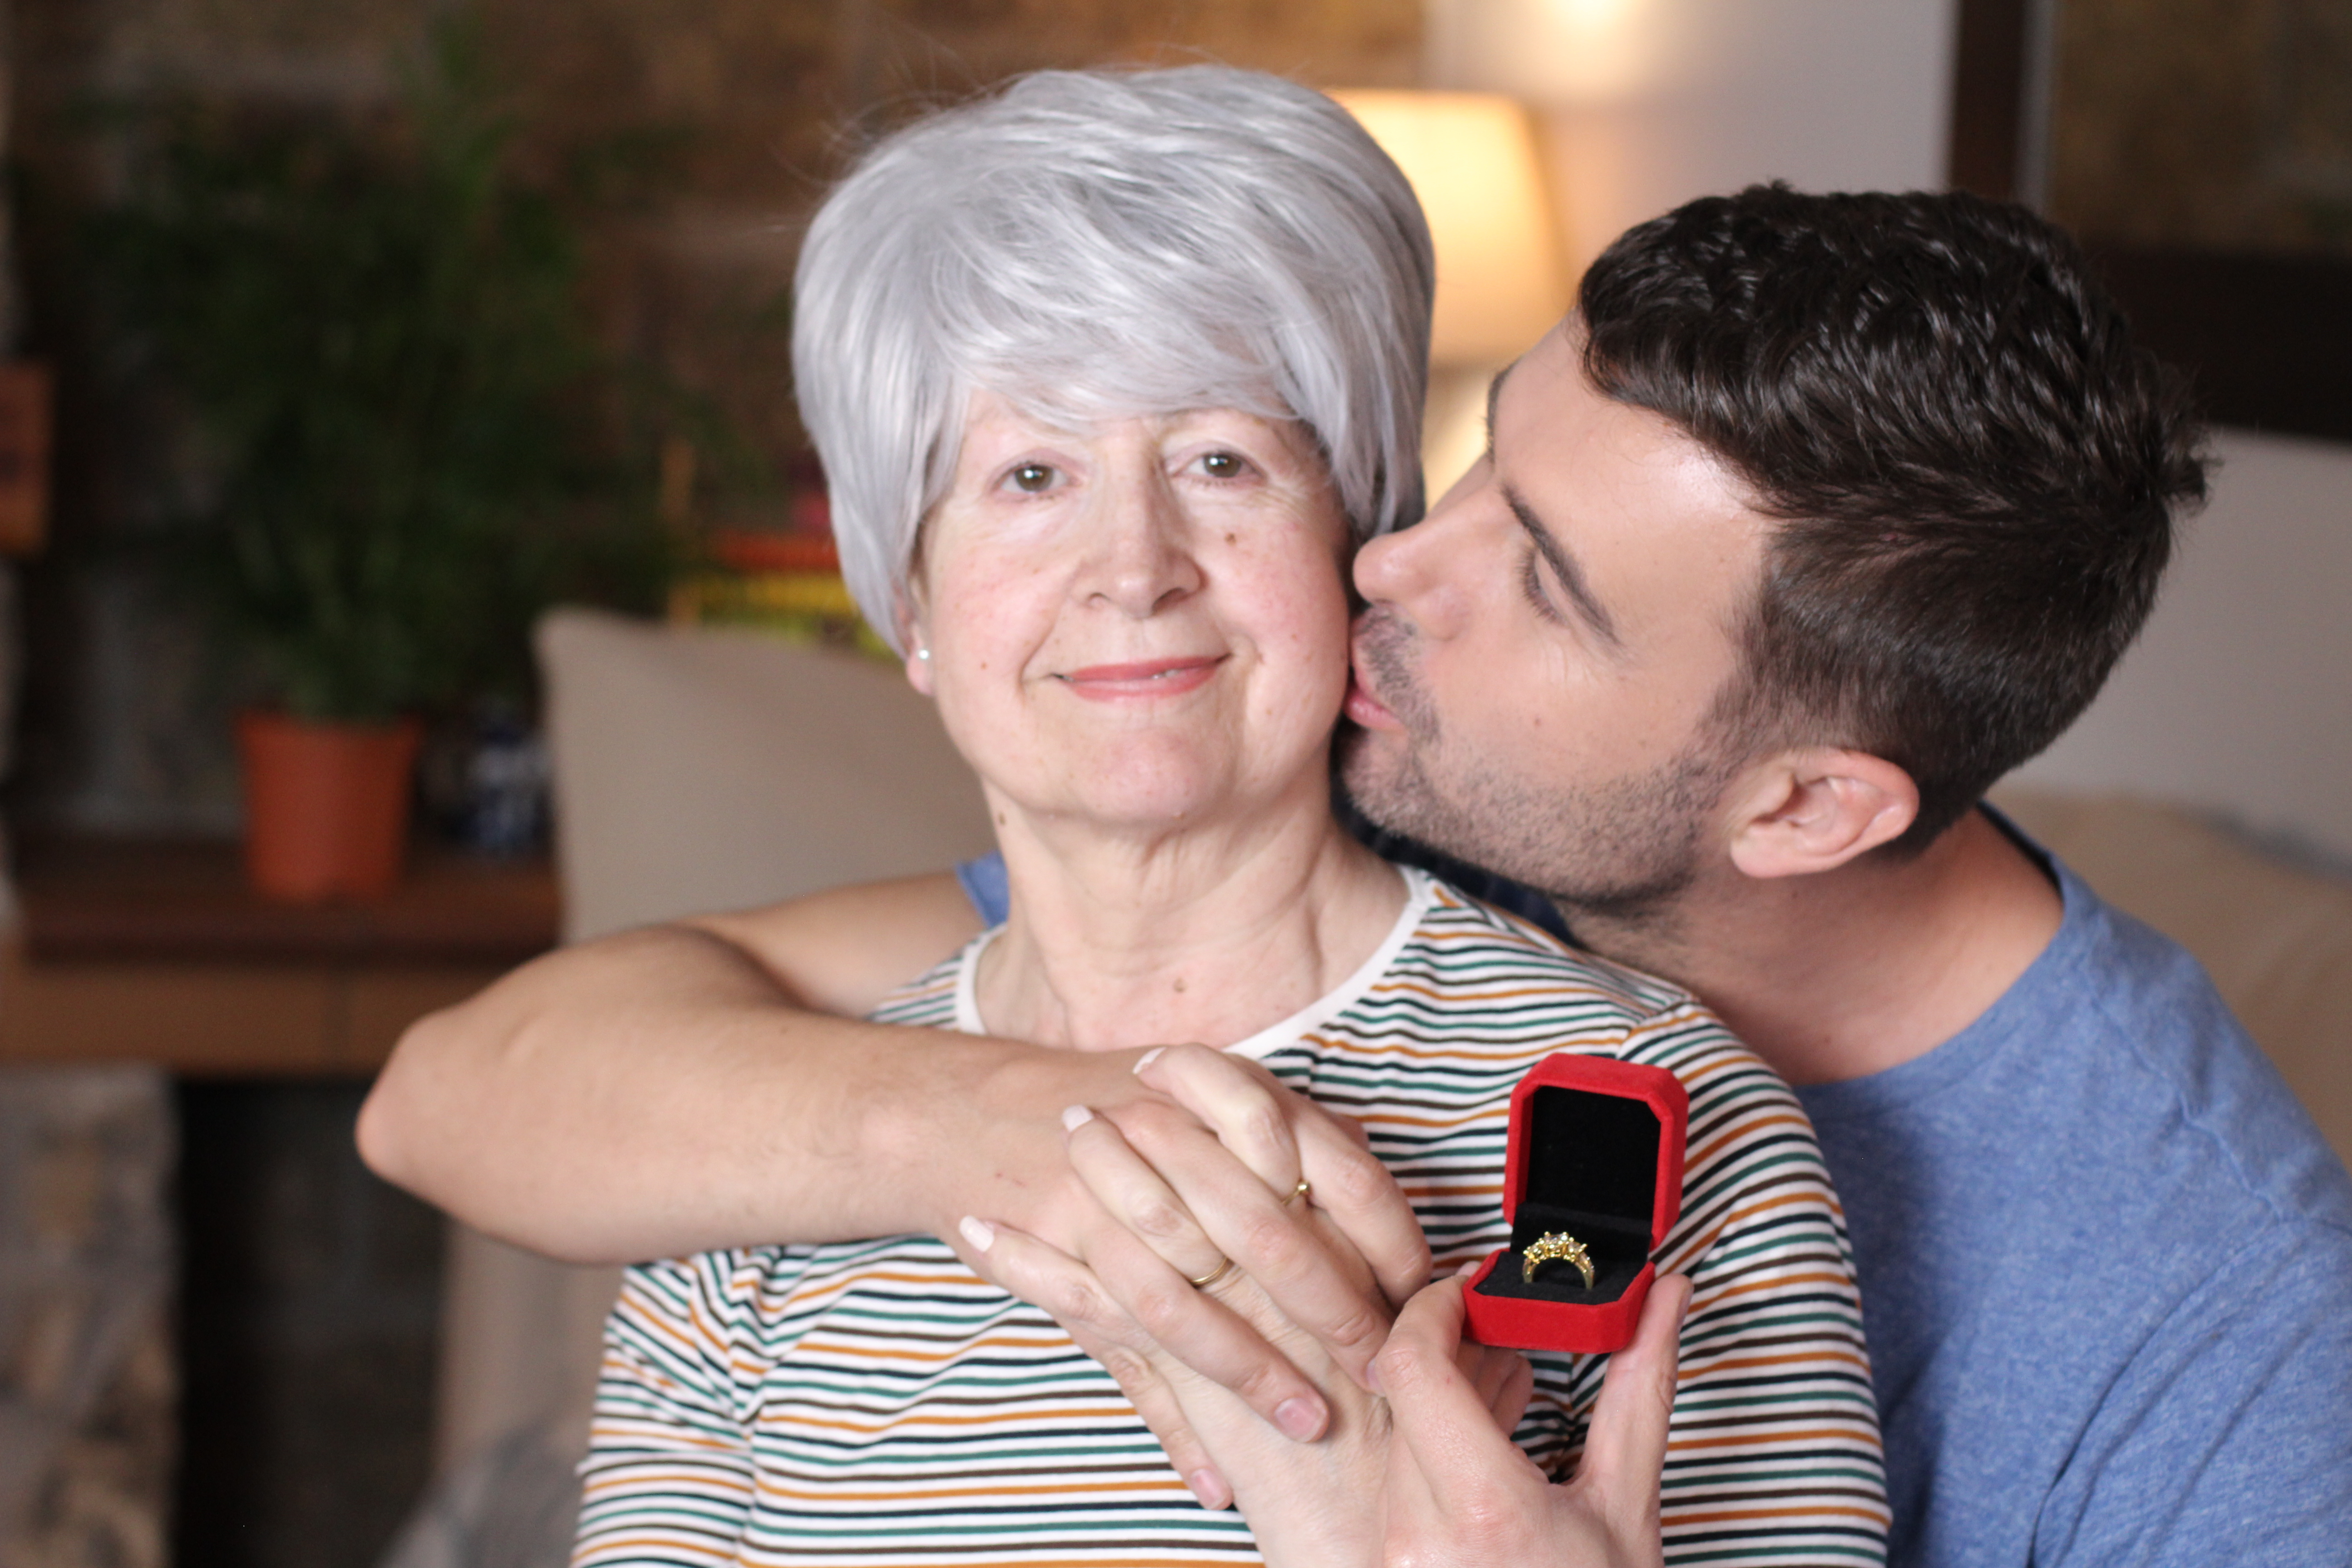 A young man kissing an older woman on the cheek | Source: Shutterstock